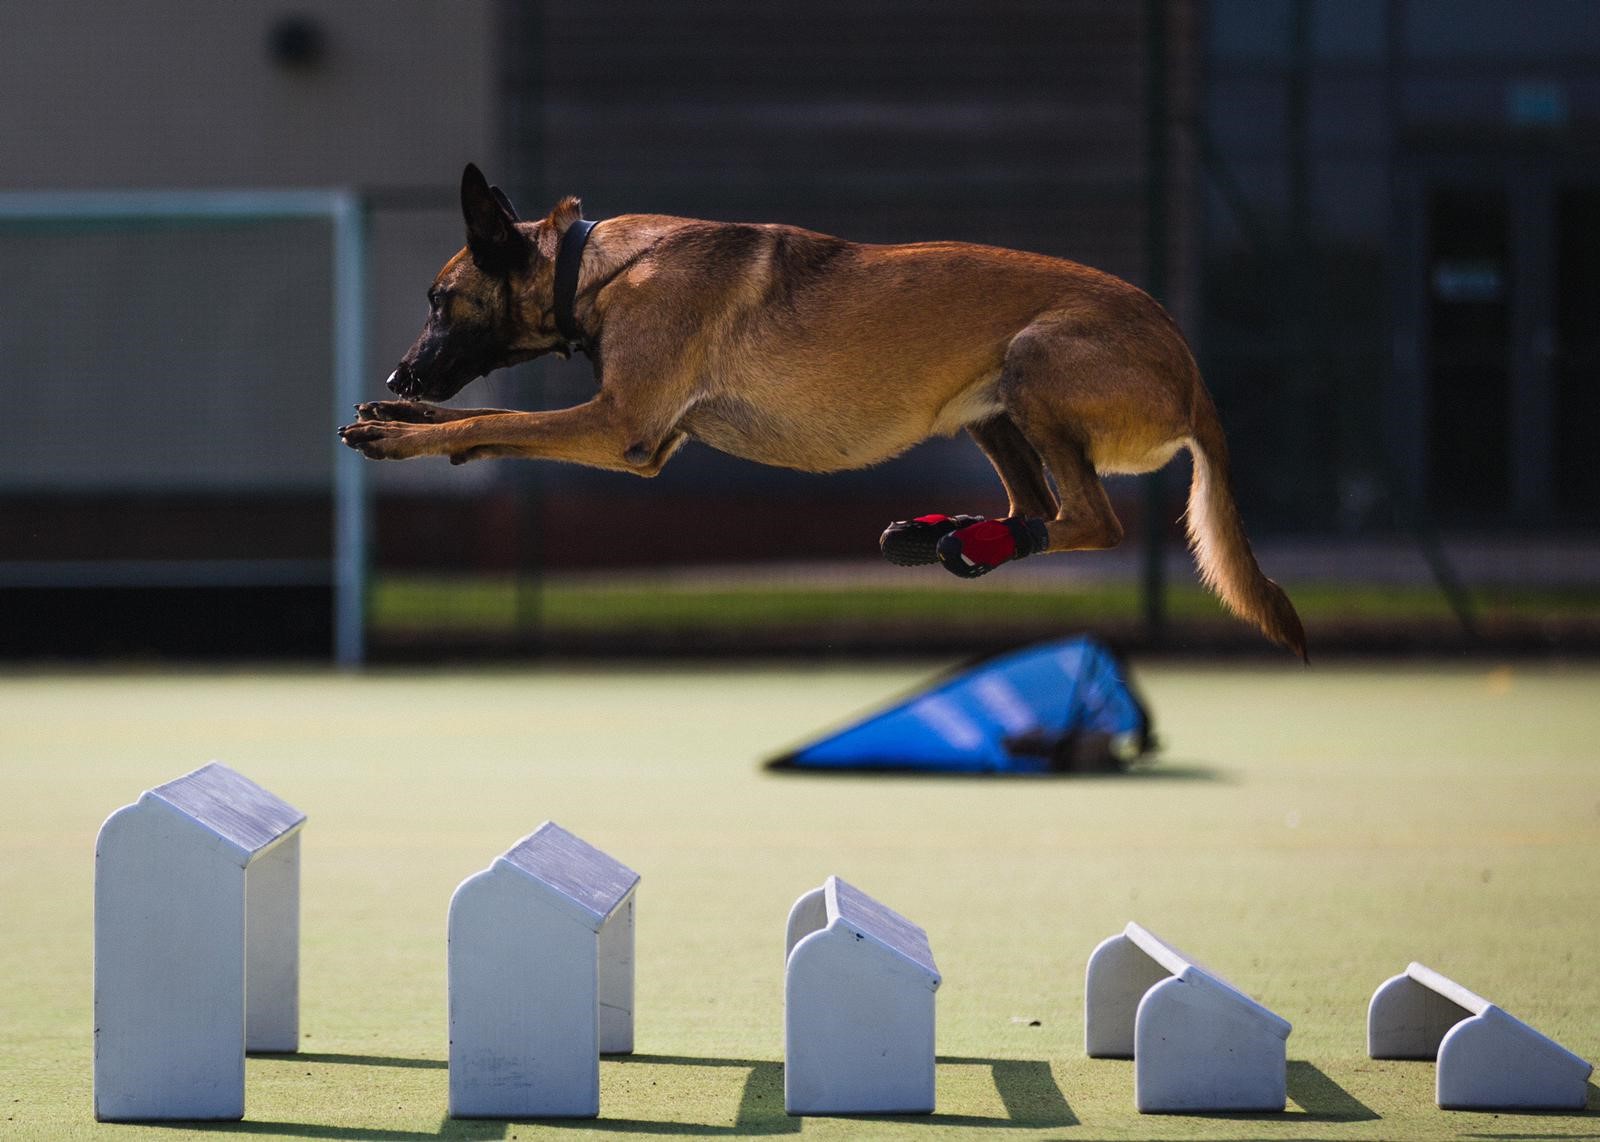 Dog leaping over obstacle course.